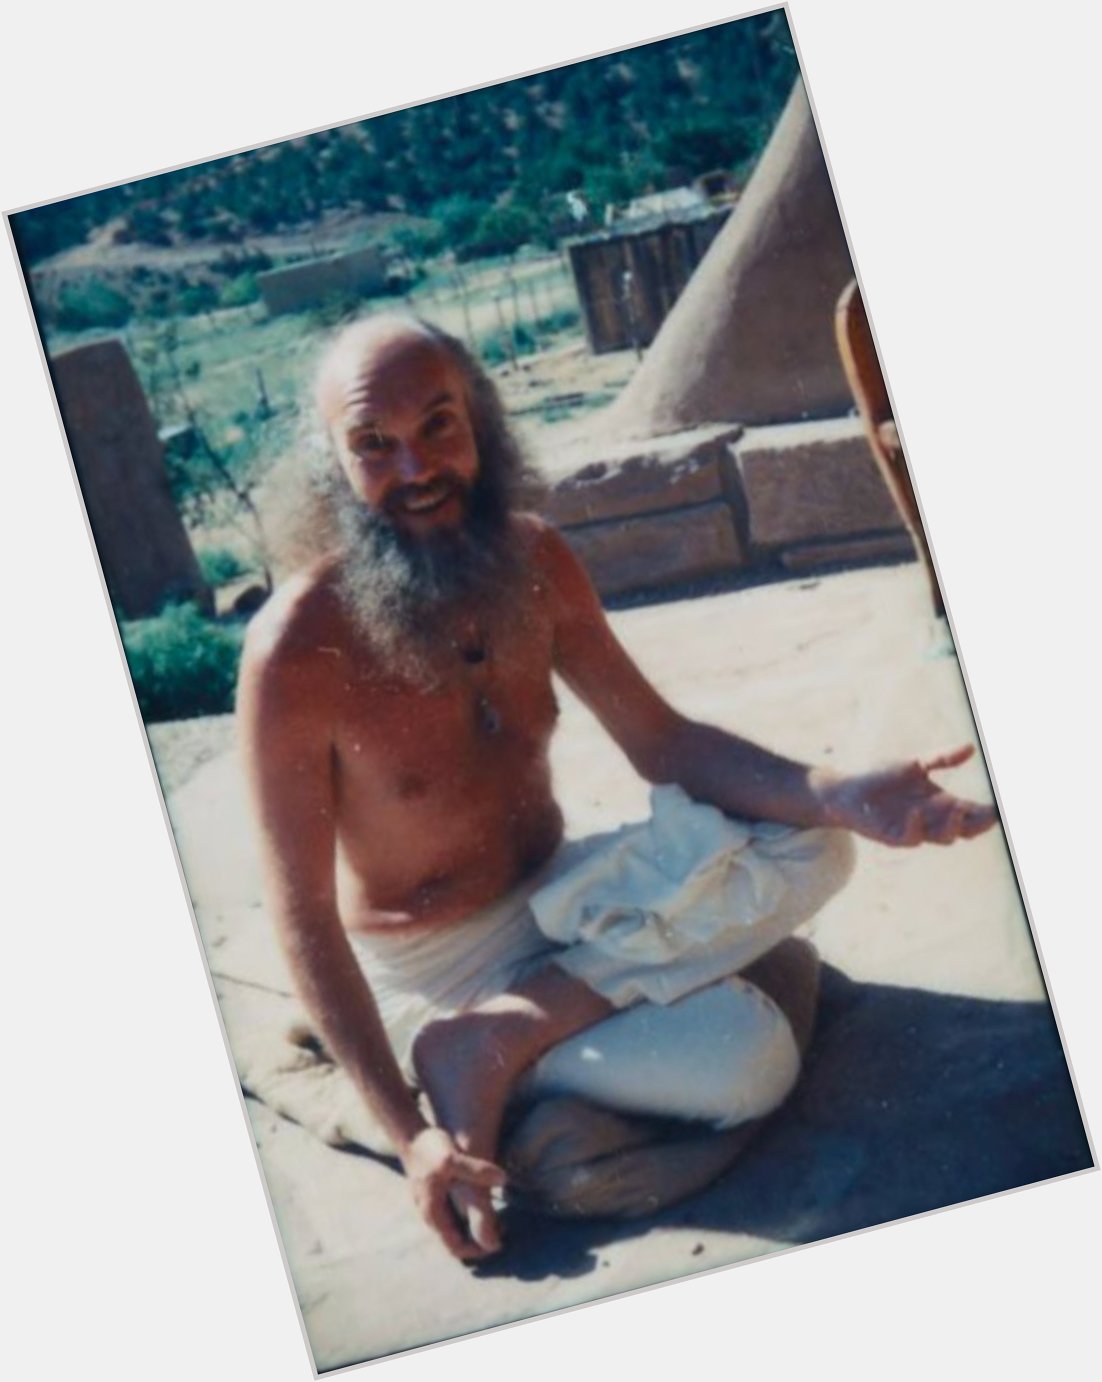 Happy Birthday (what would\ve been your 90th Birthday) Ram Dass!  -  